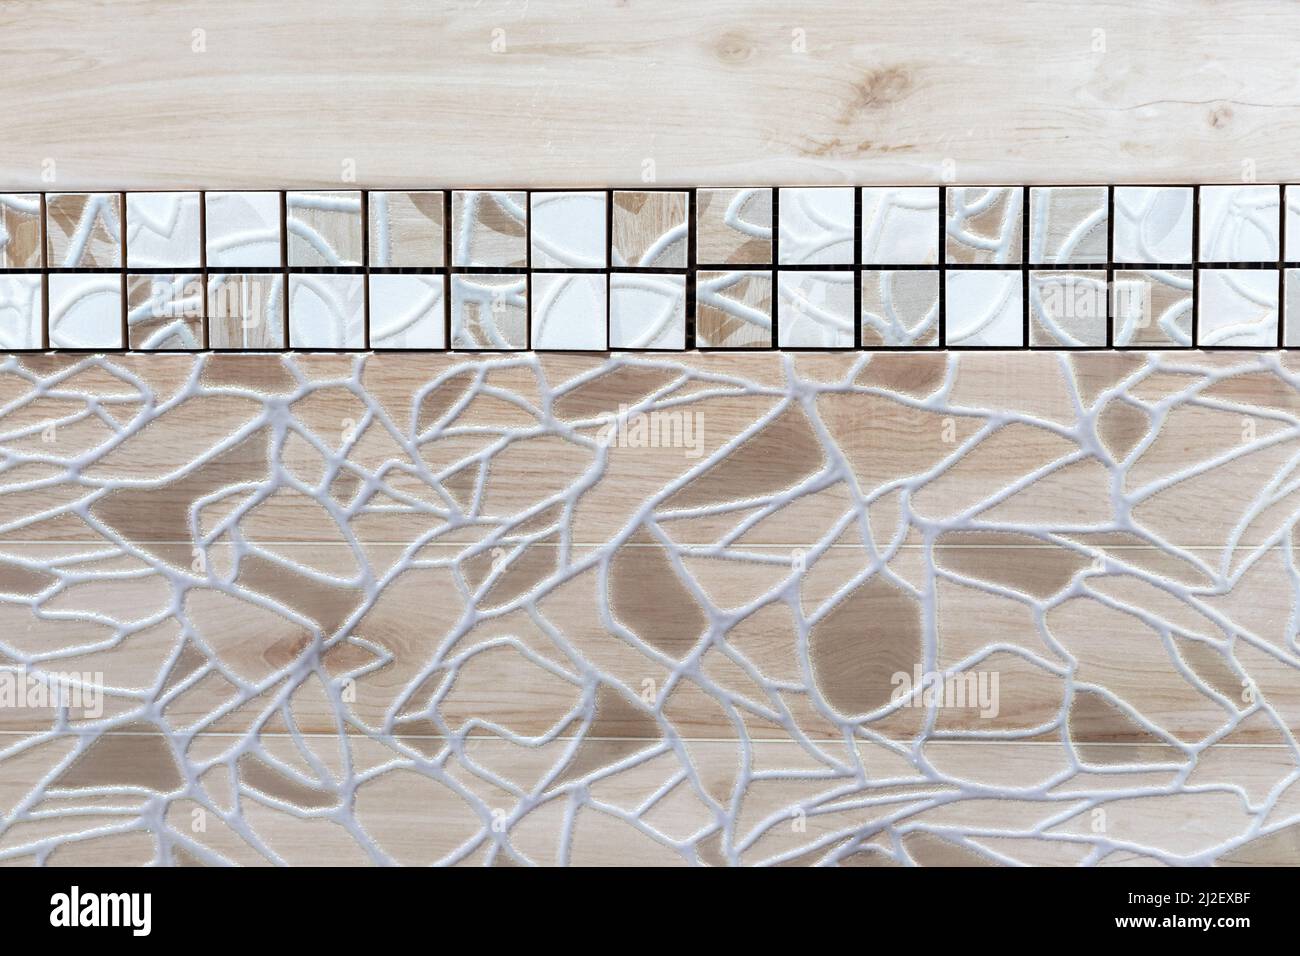 Beige-brown ceramic tile with abstract pattern and border. Stock Photo